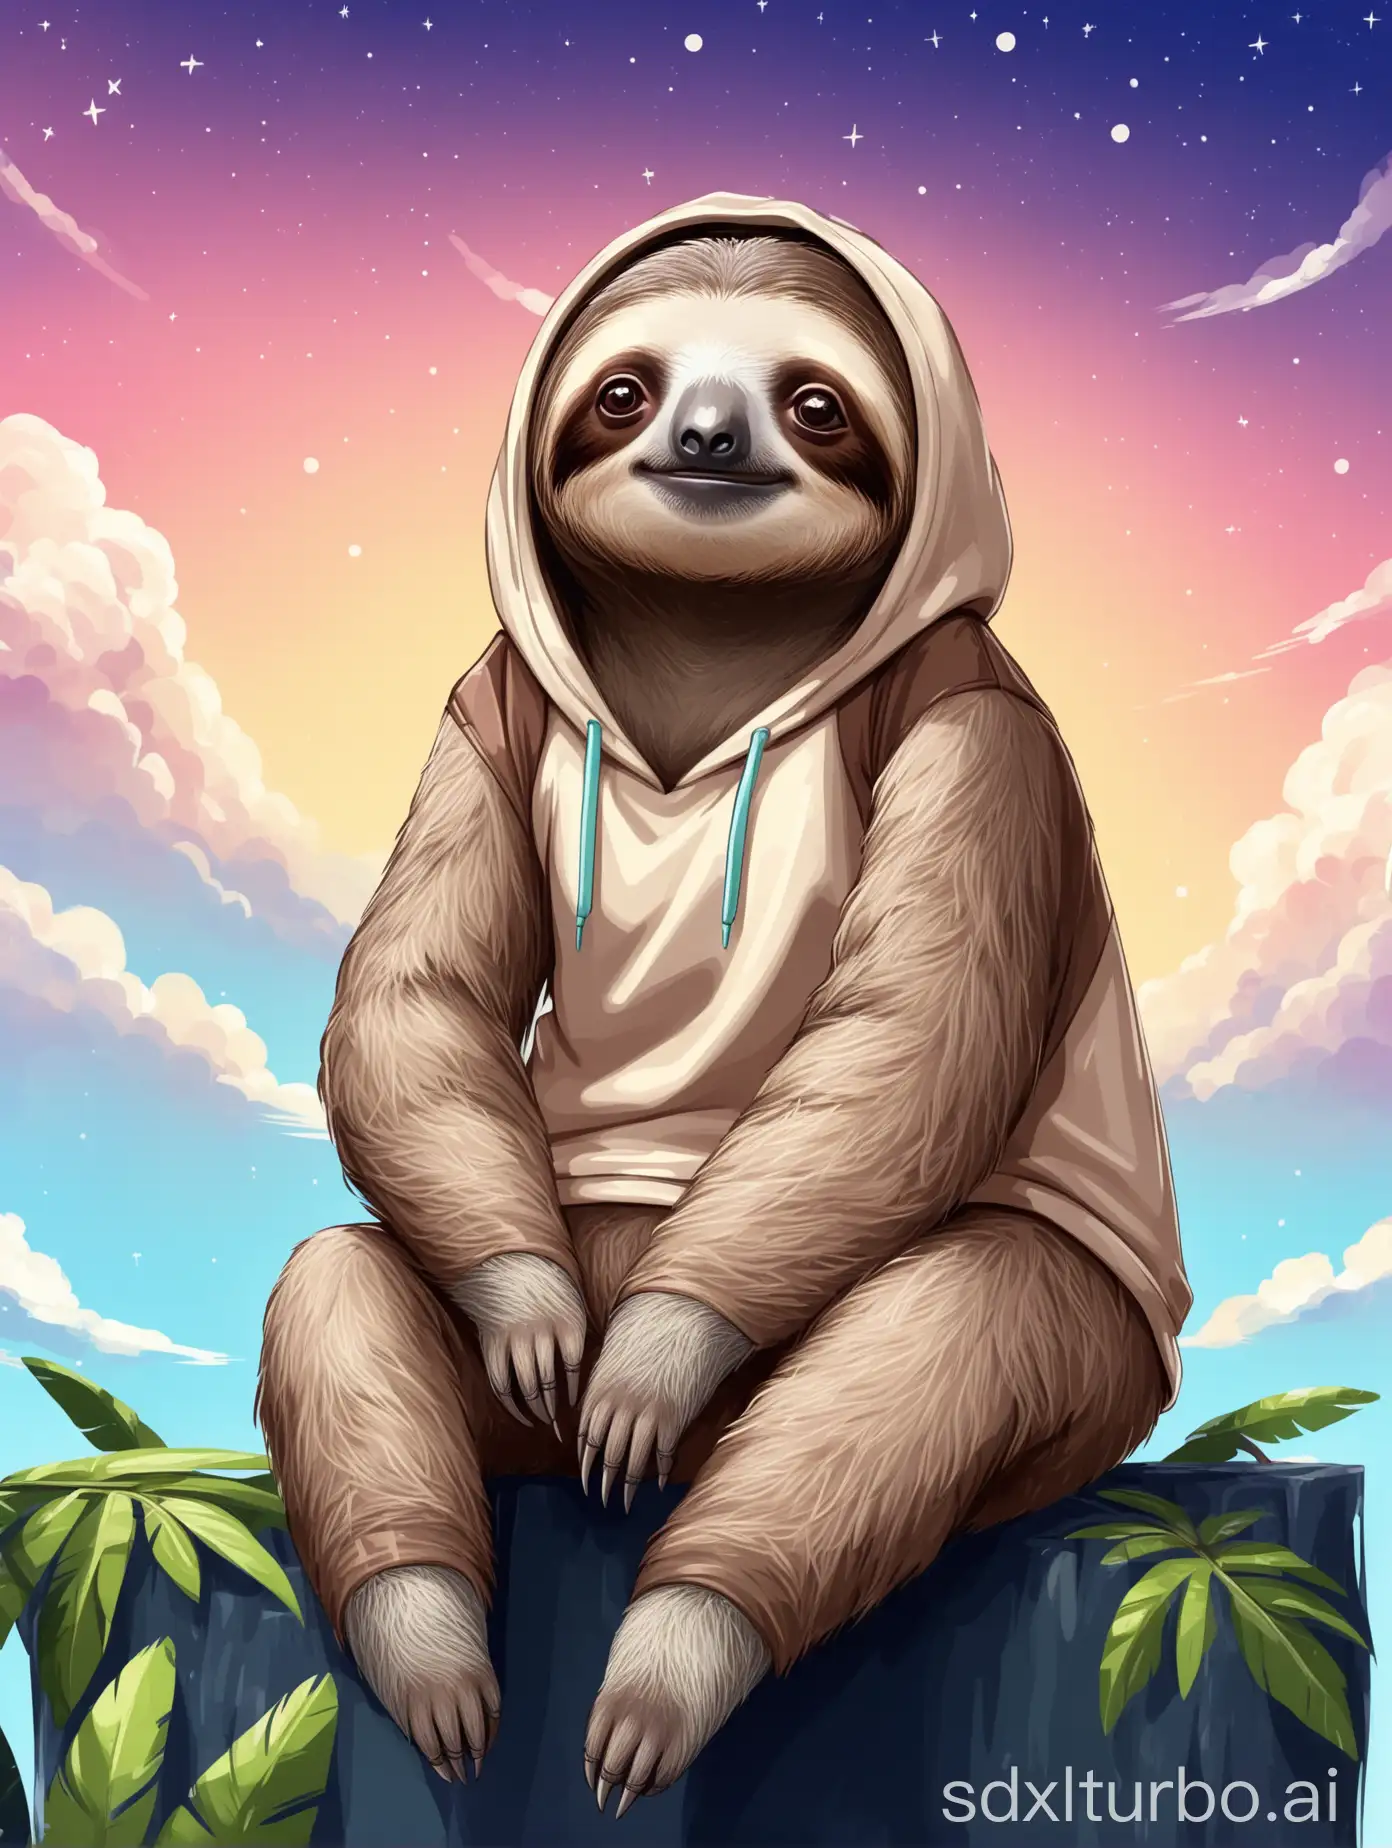 Cute-and-Confused-Sloth-in-Adorable-Outfit-Gazing-at-the-Sky